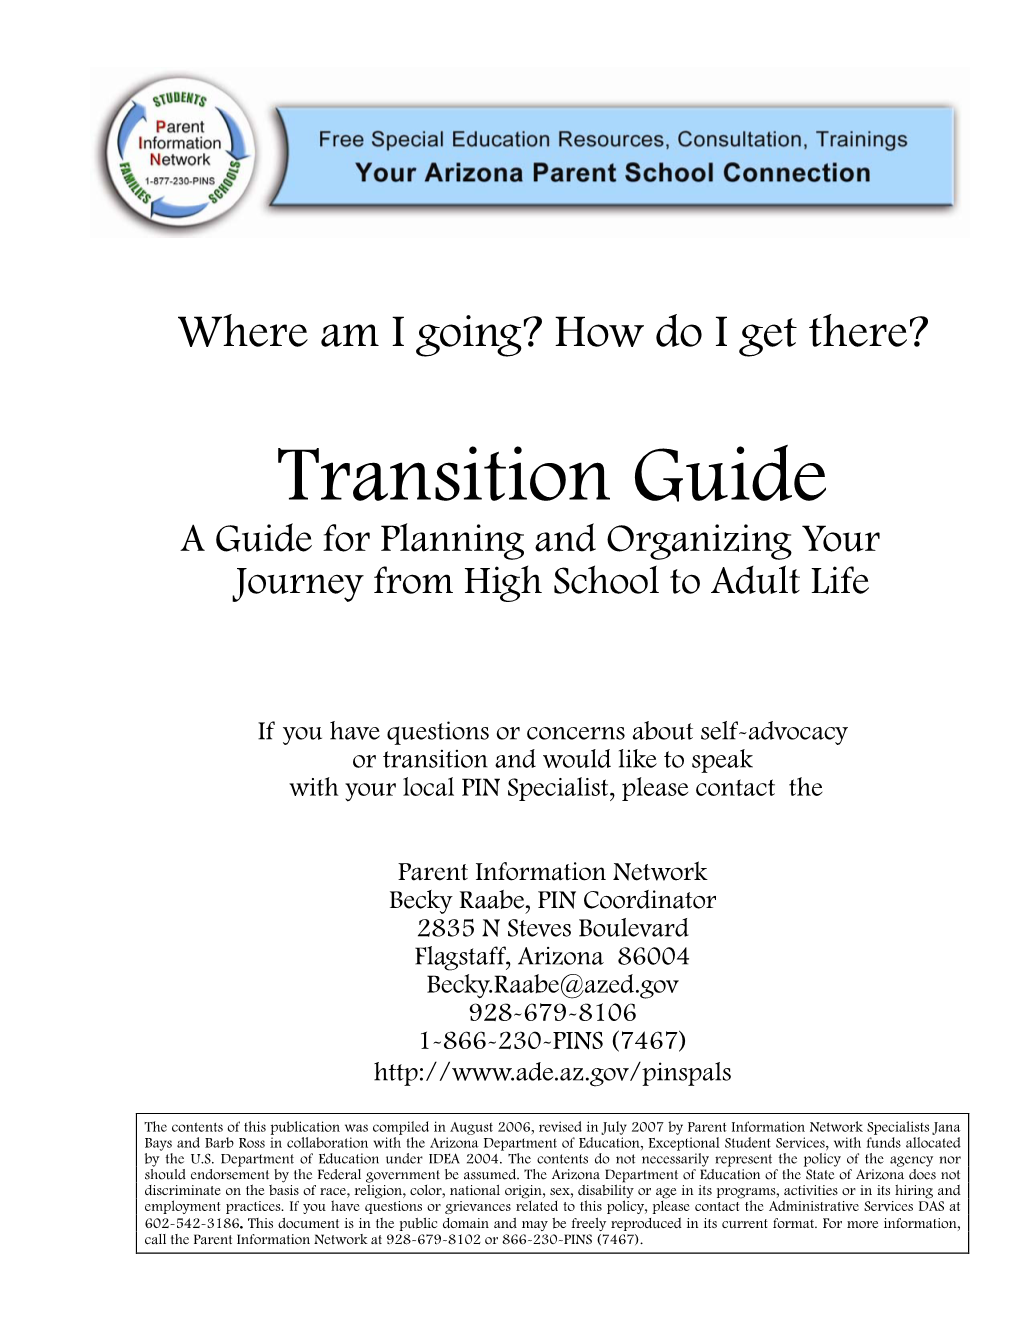 Transition Guide a Guide for Planning and Organizing Your